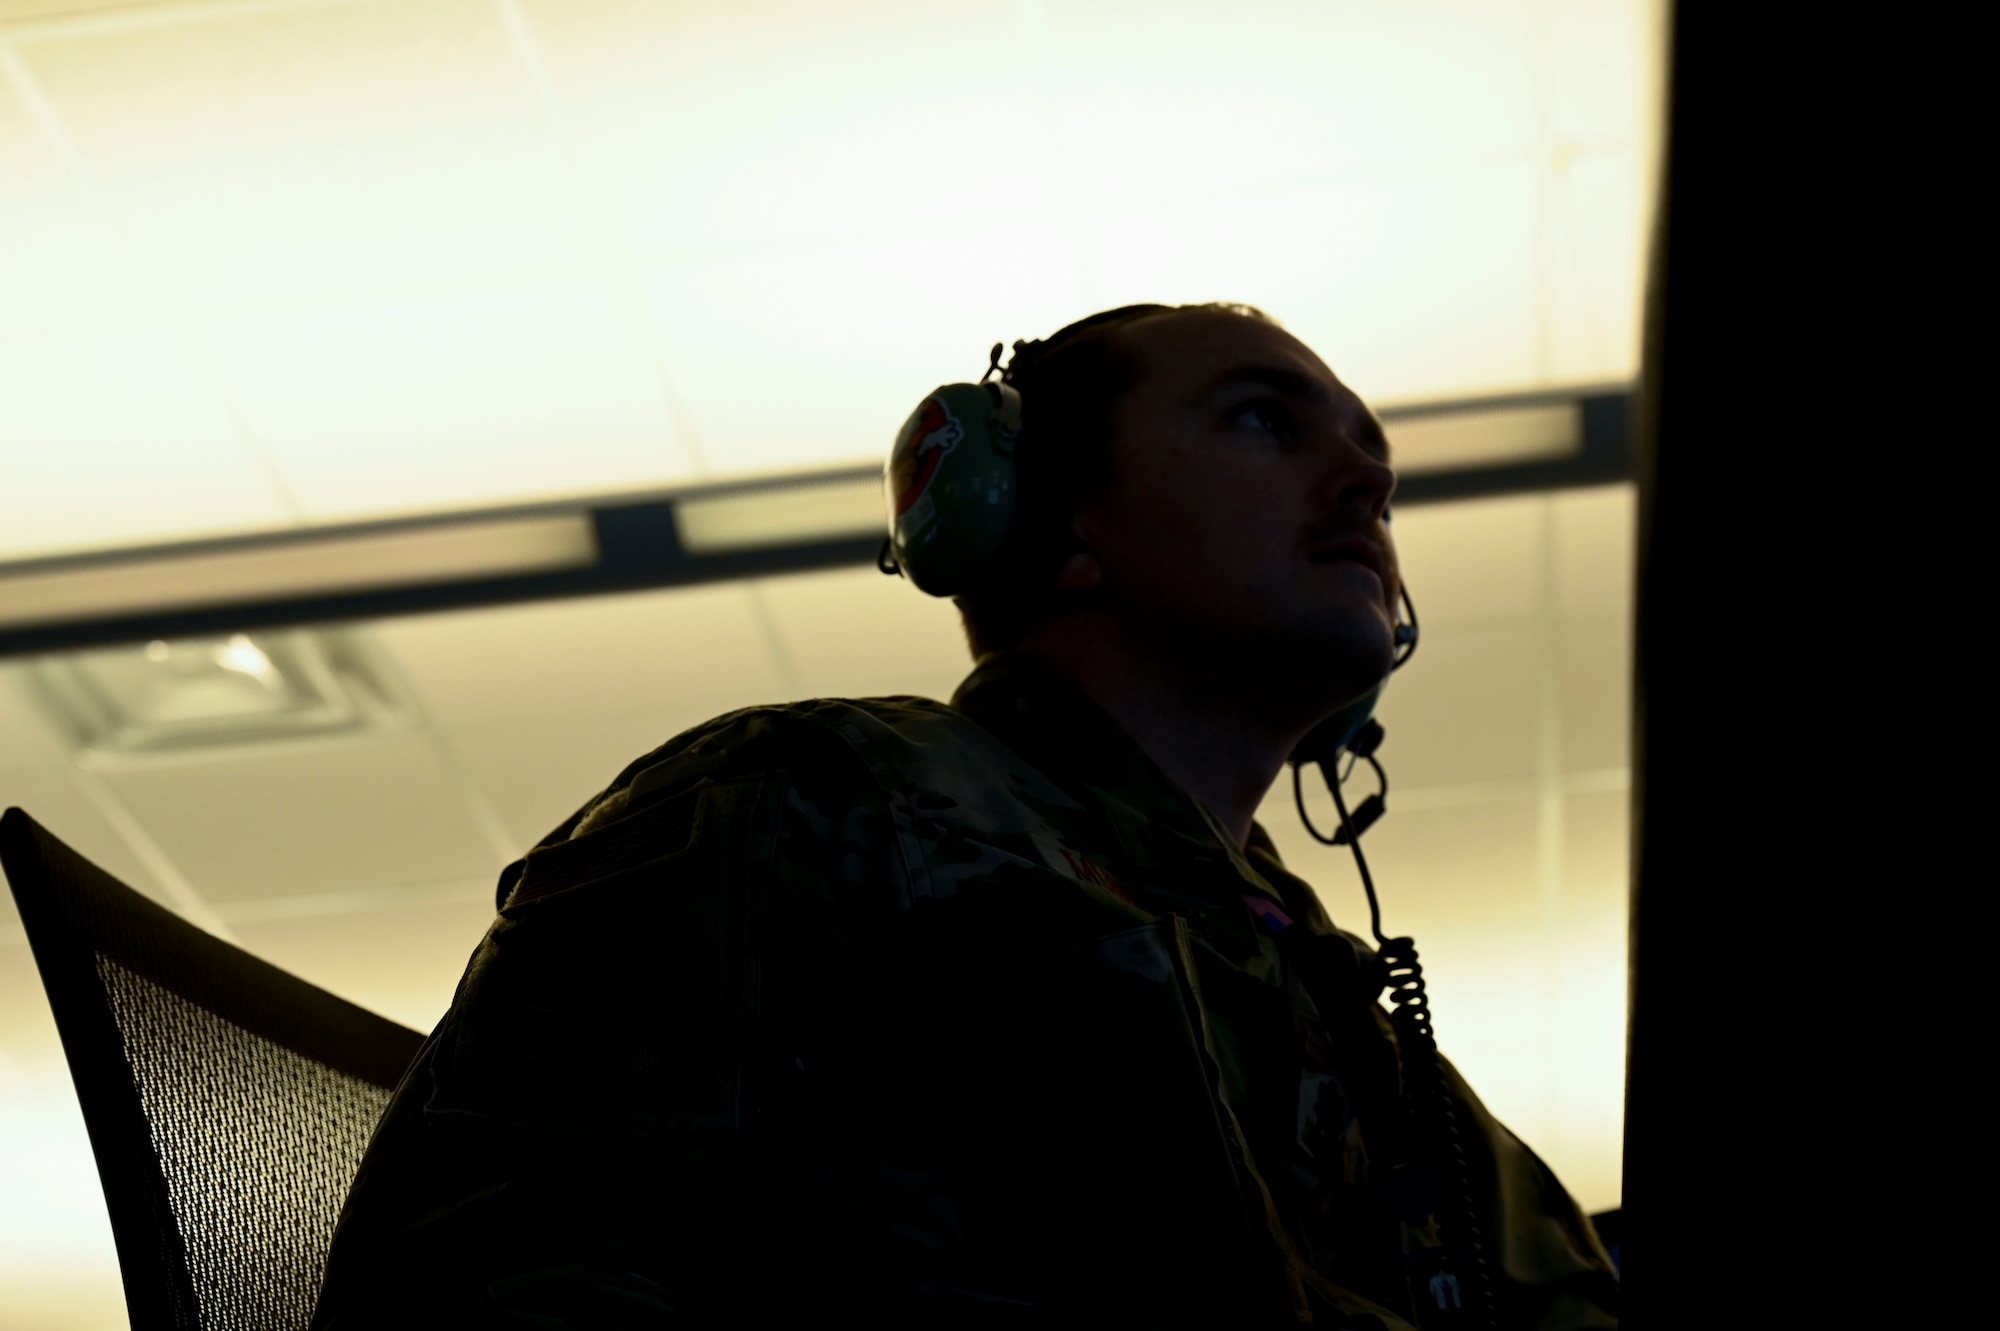 A member from the 727th Expeditionary Air Control Squadron (EACS) “Kingpin” works at his station, at Shaw Air Force Base, South Carolina, April 21, 2021. Kingpin is a tactical command and control unit that serves as the lead control and reporting center and directly provides the Combined Air Operations Center with a common air picture, enabling the completion of air operations across the US Central Command area of responsibility. The 727th EACS repositioned from Al Dhafra Air Base and began full operations April 20 from Shaw AFB. (U.S. Air Force photo by Tech. Sgt. E’Lysia A. Wray)